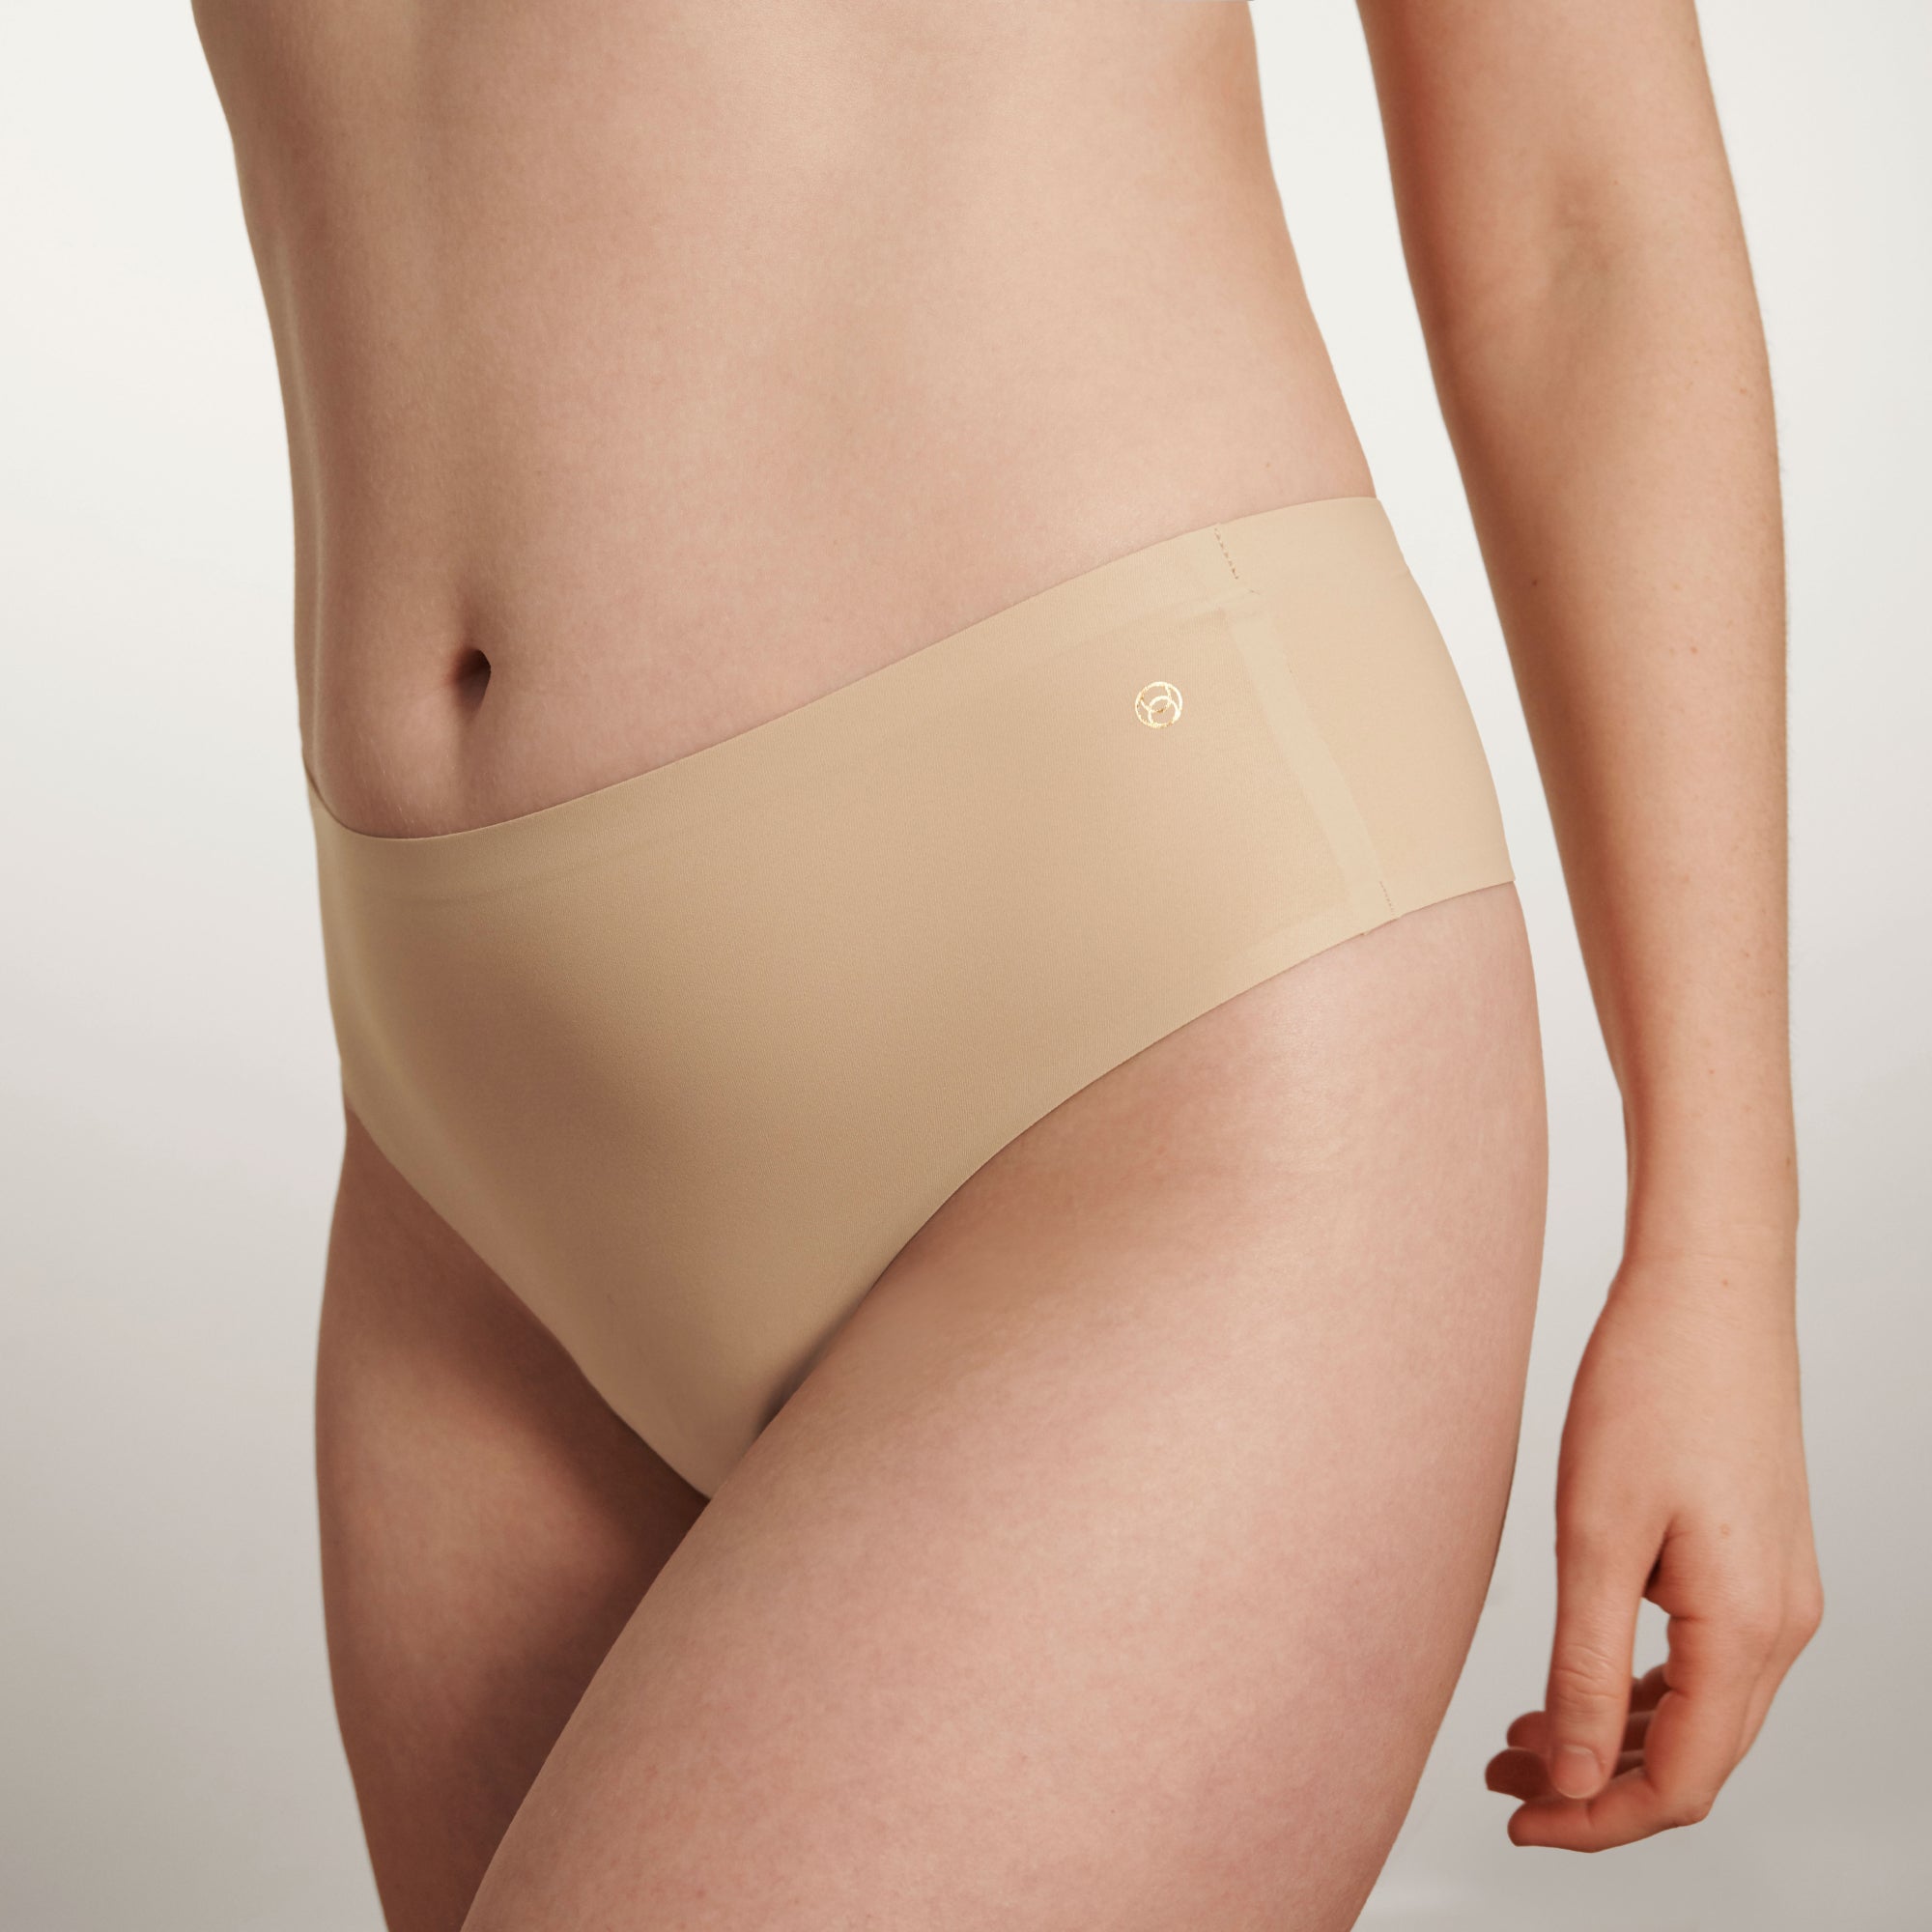 Seamless Panties Every Women Should Know About